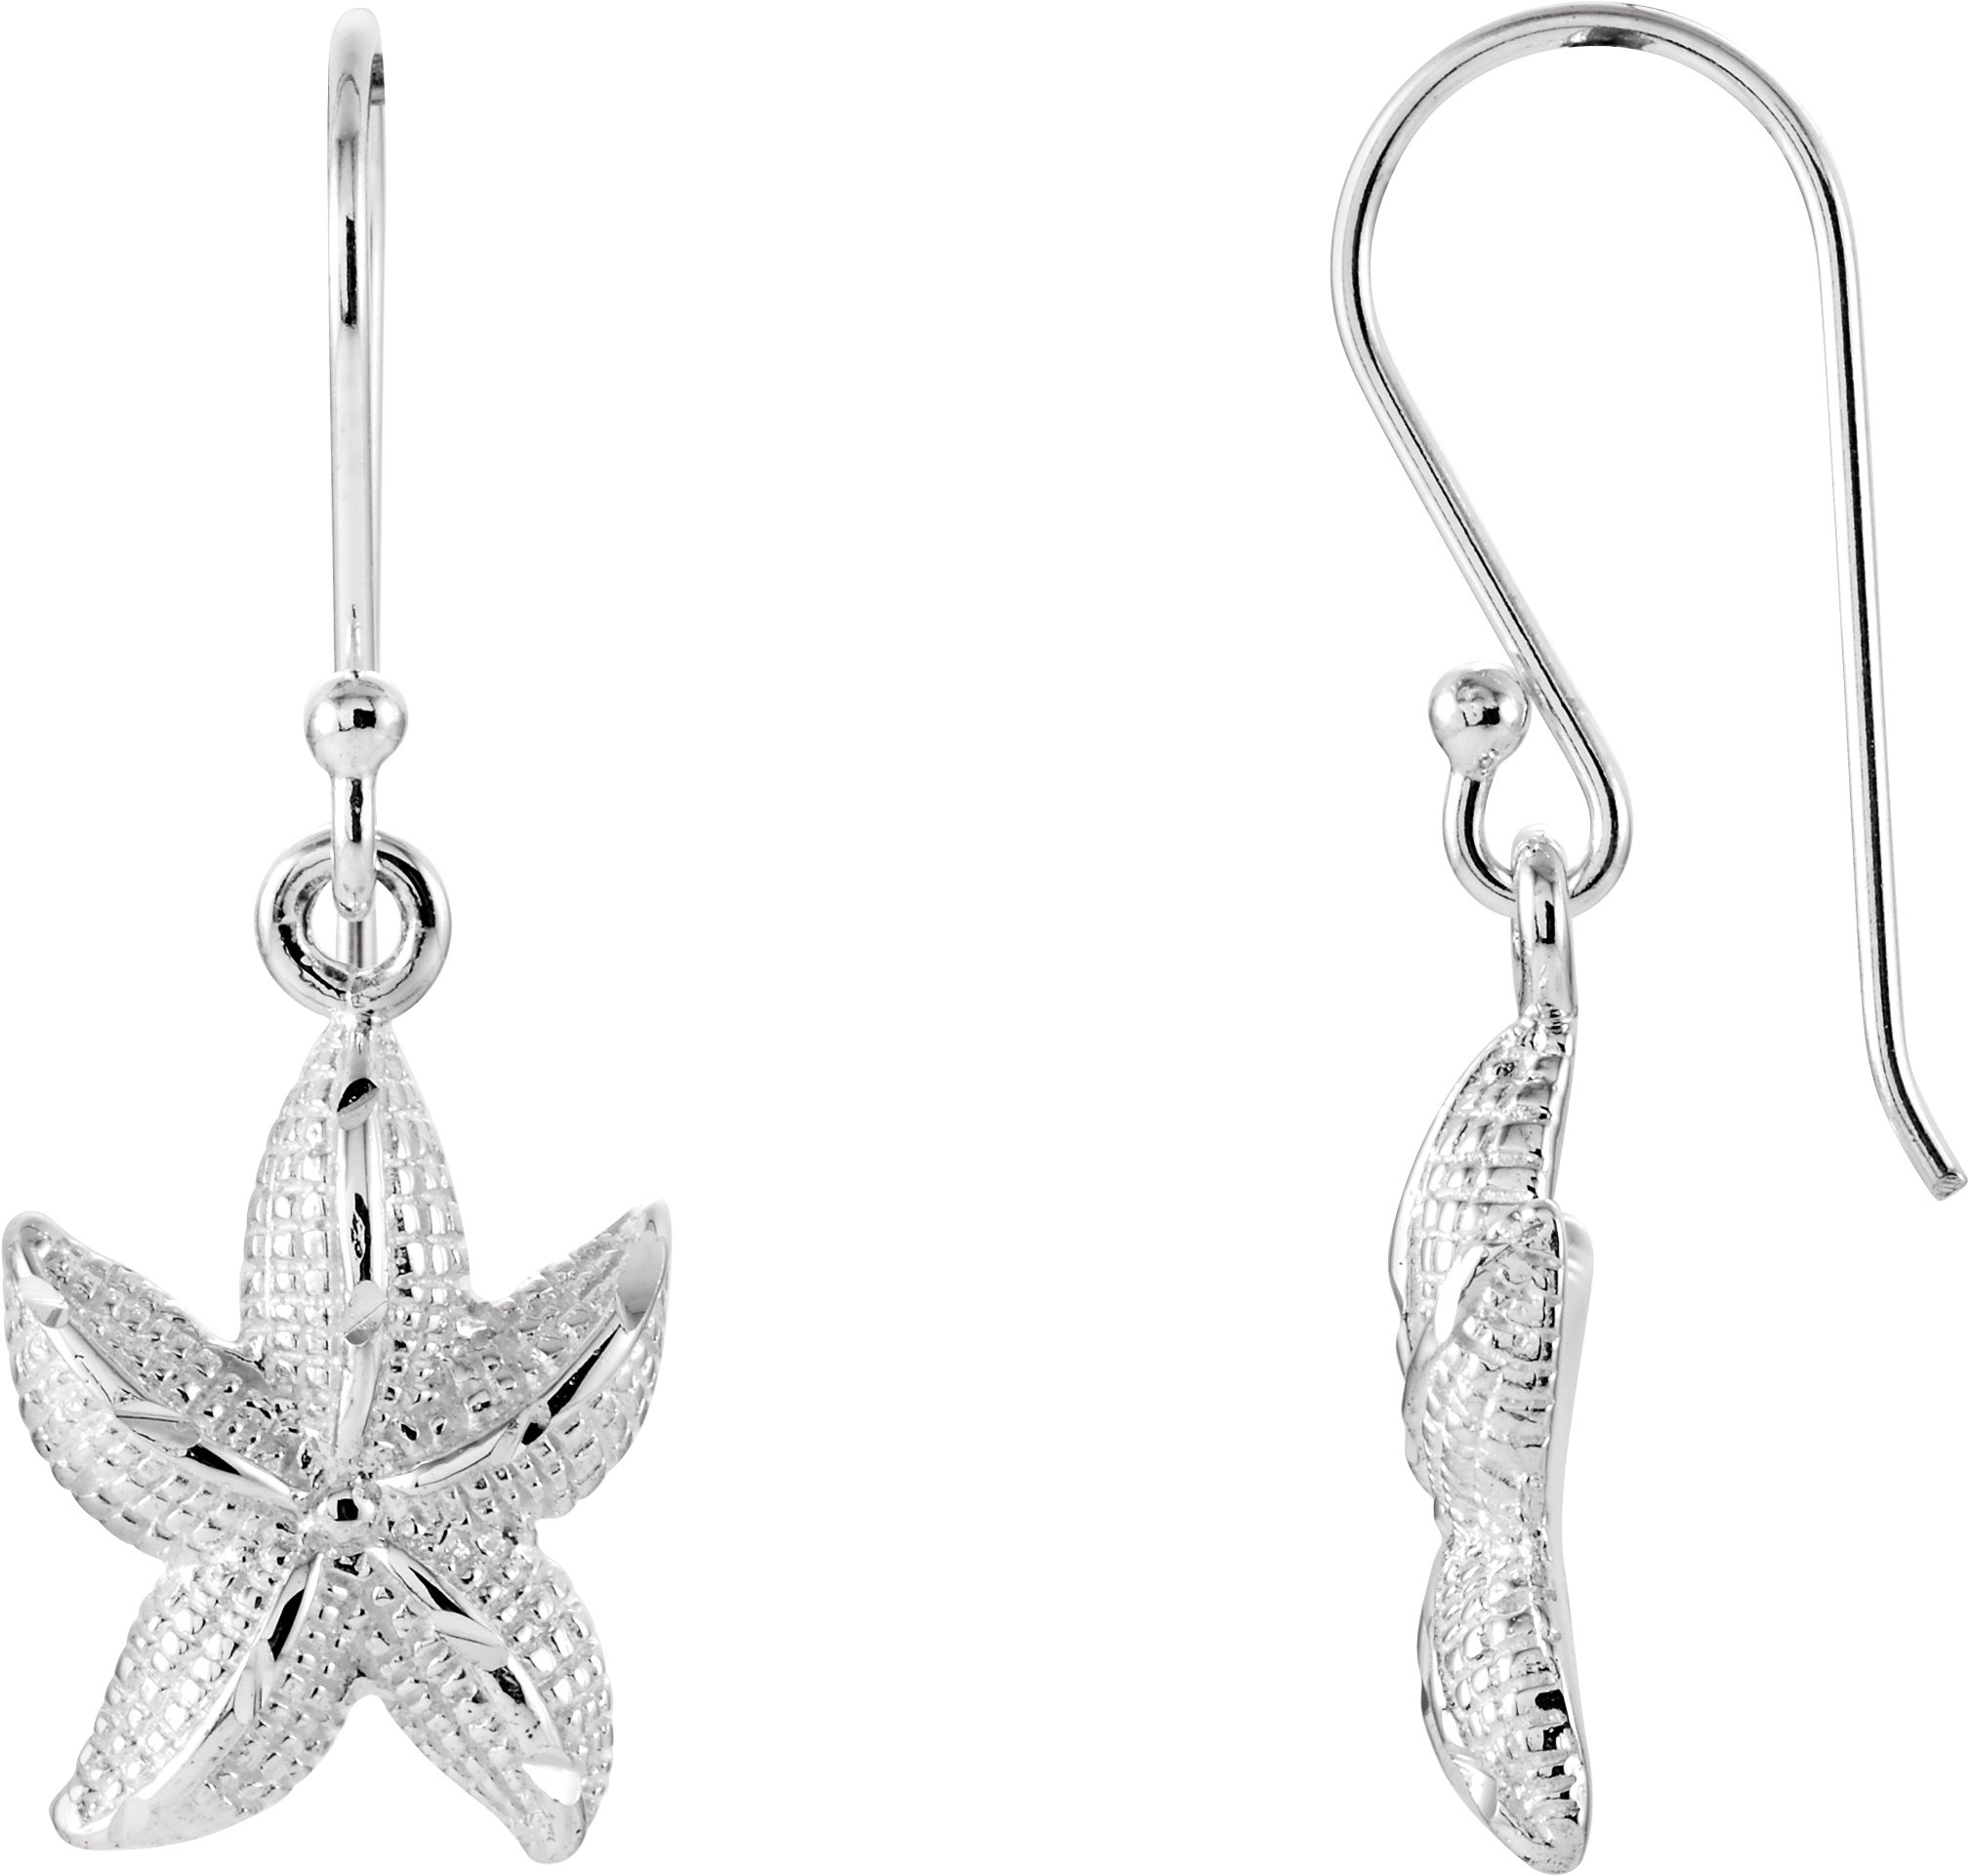 84821 / Sterling Silver / Pair 19.04X12.14 Mm / Polished / Starfish Earrings